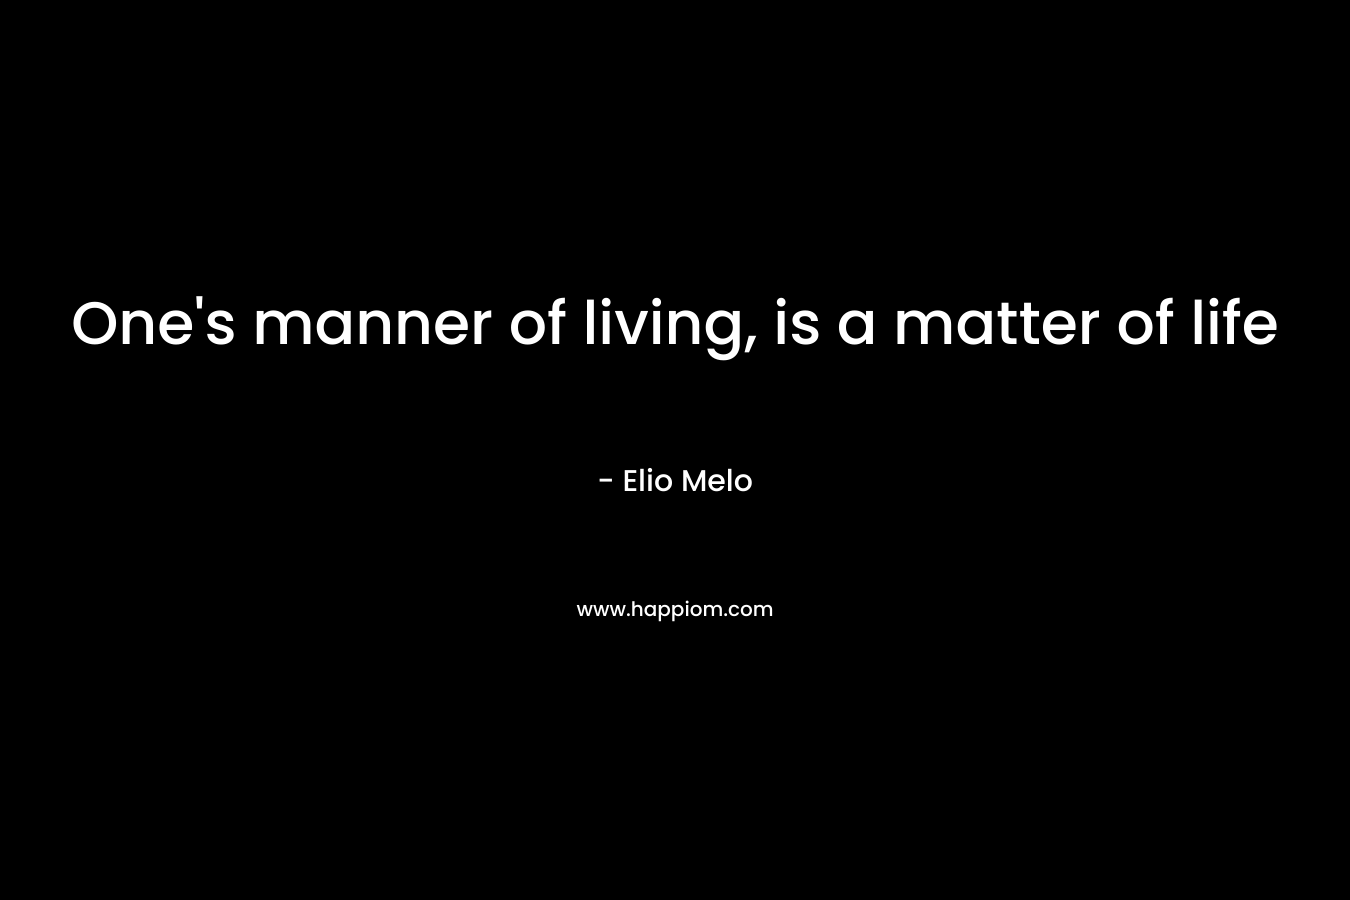 One's manner of living, is a matter of life